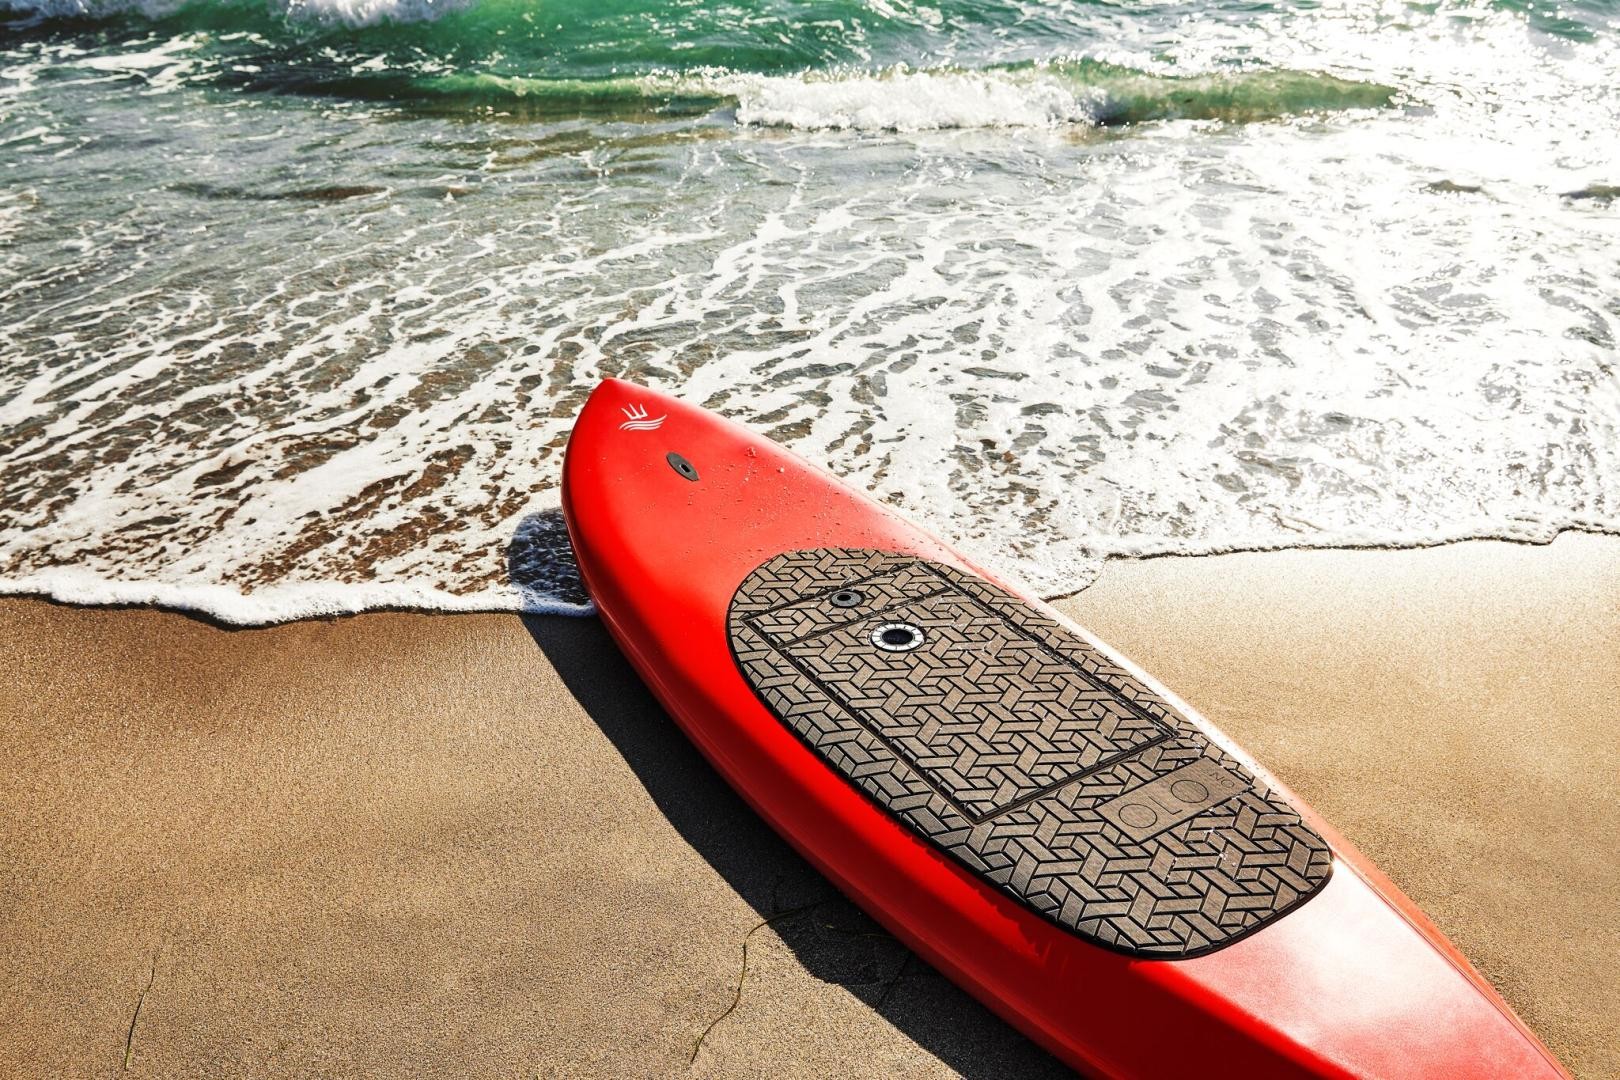 The electric surfboard by OLO